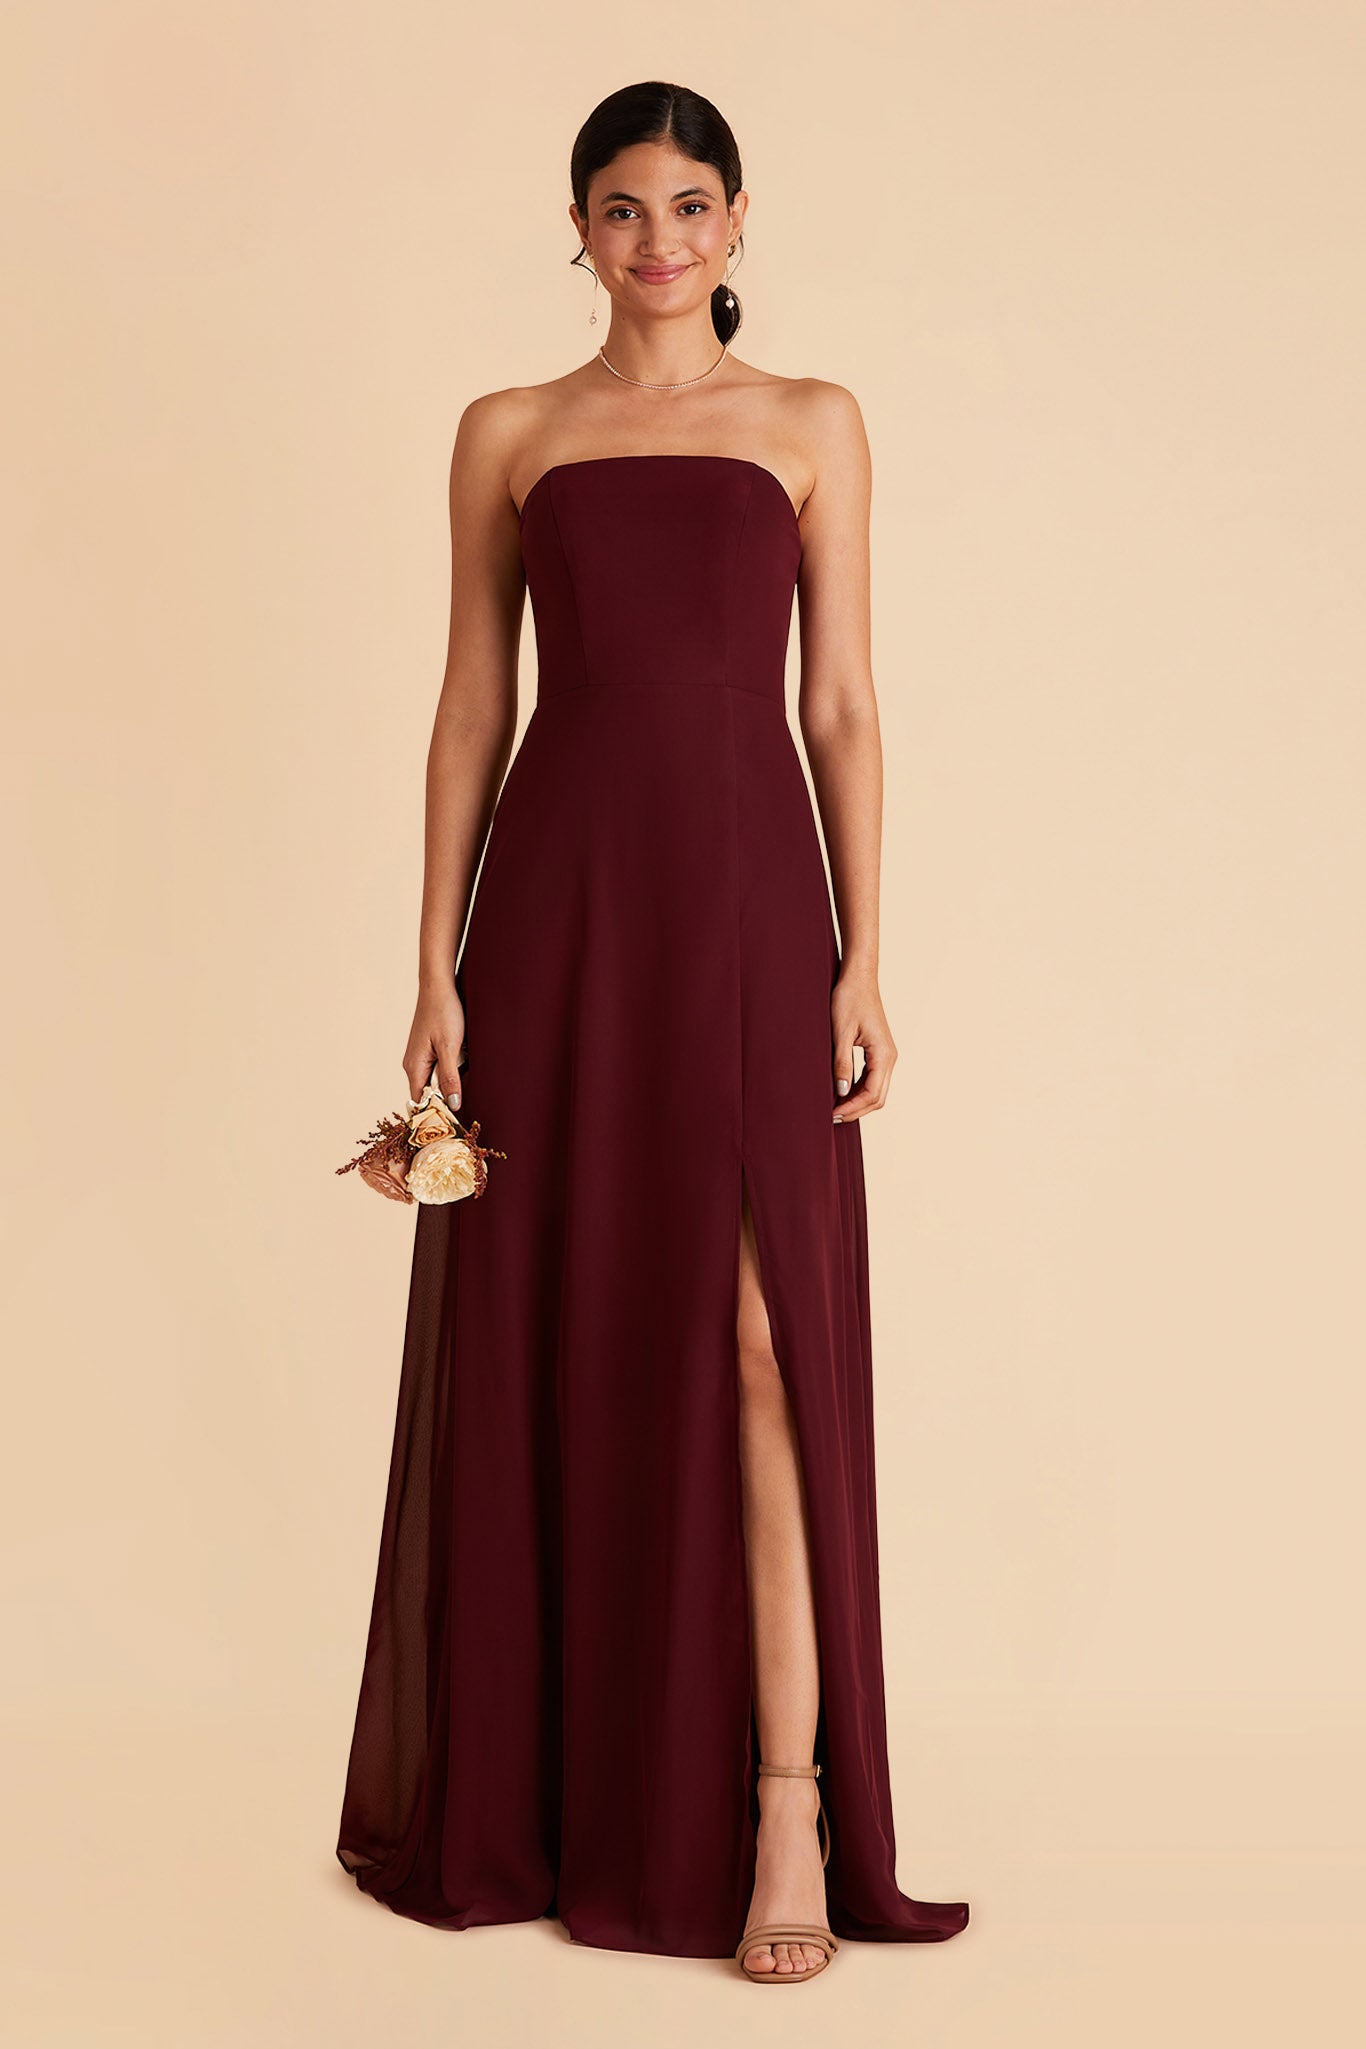 Chris bridesmaid dress with slit in cabernet chiffon by Birdy Grey, front view